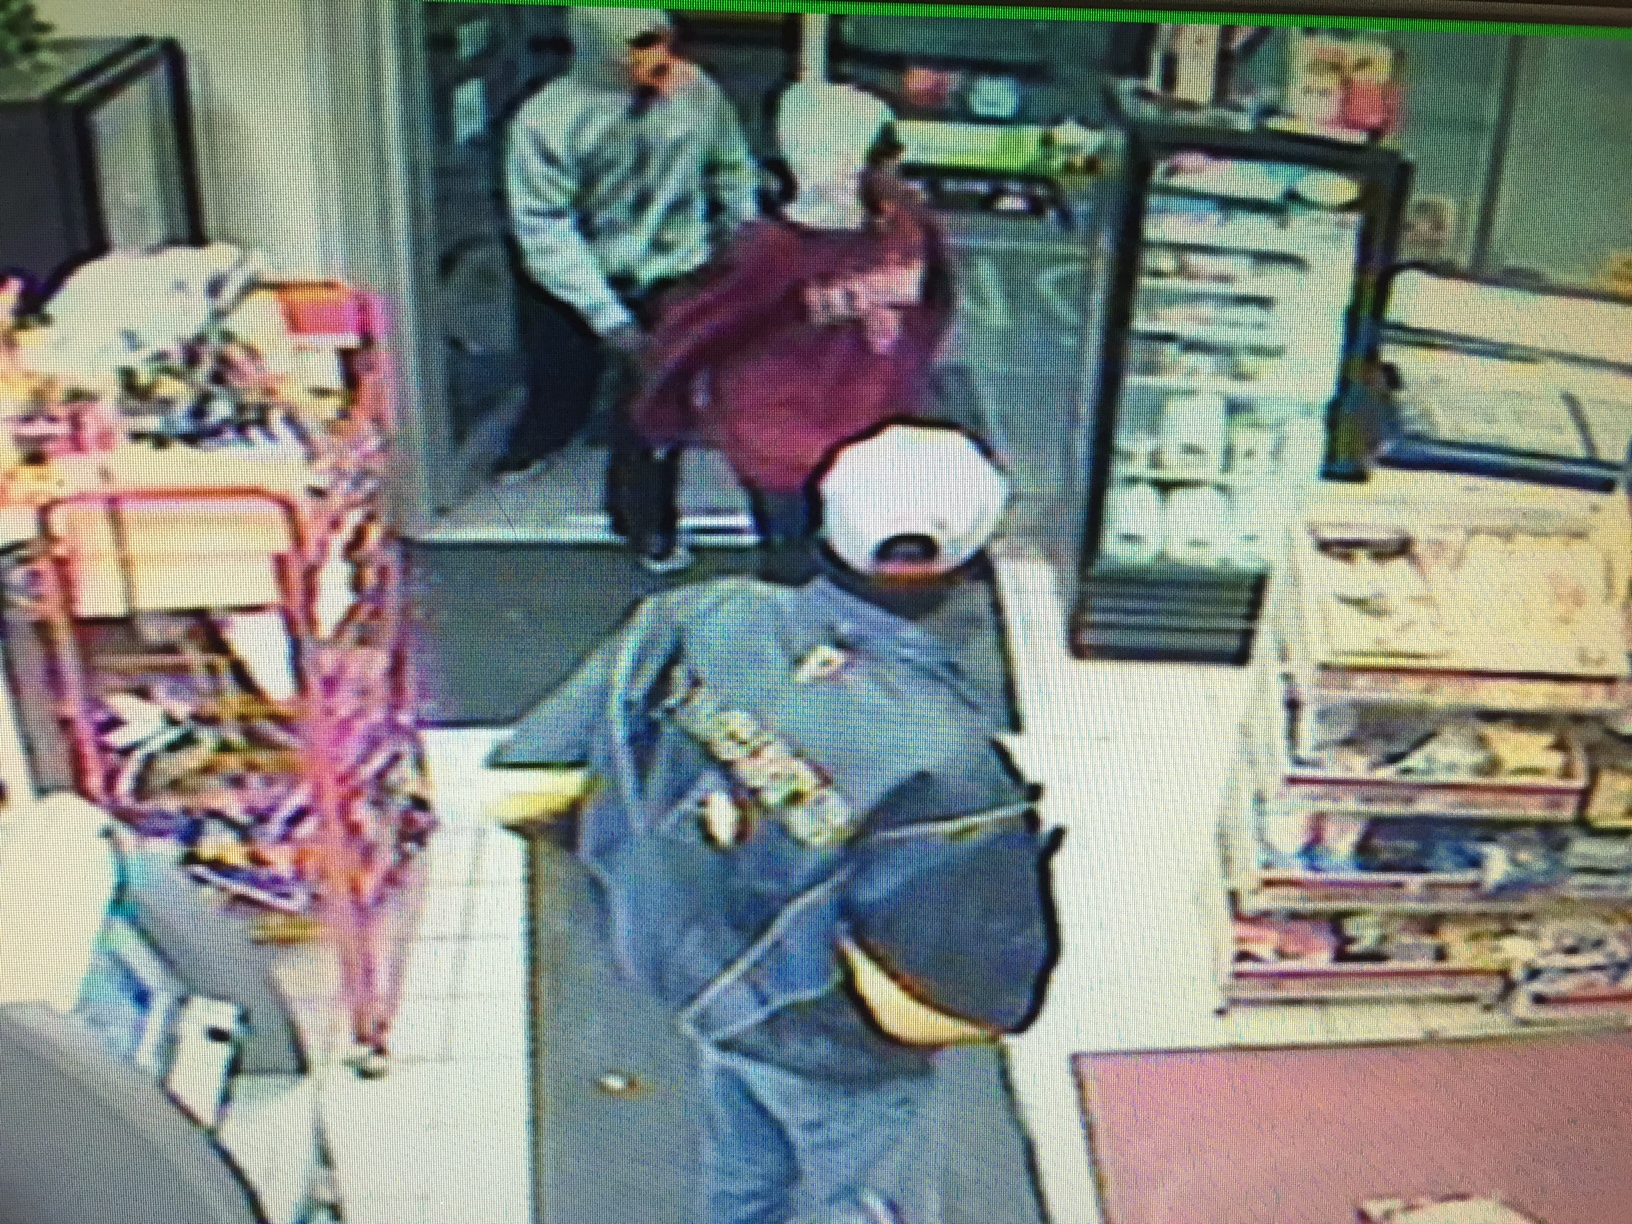 030116 Indy Gas Station Robber Suspects Photo 2